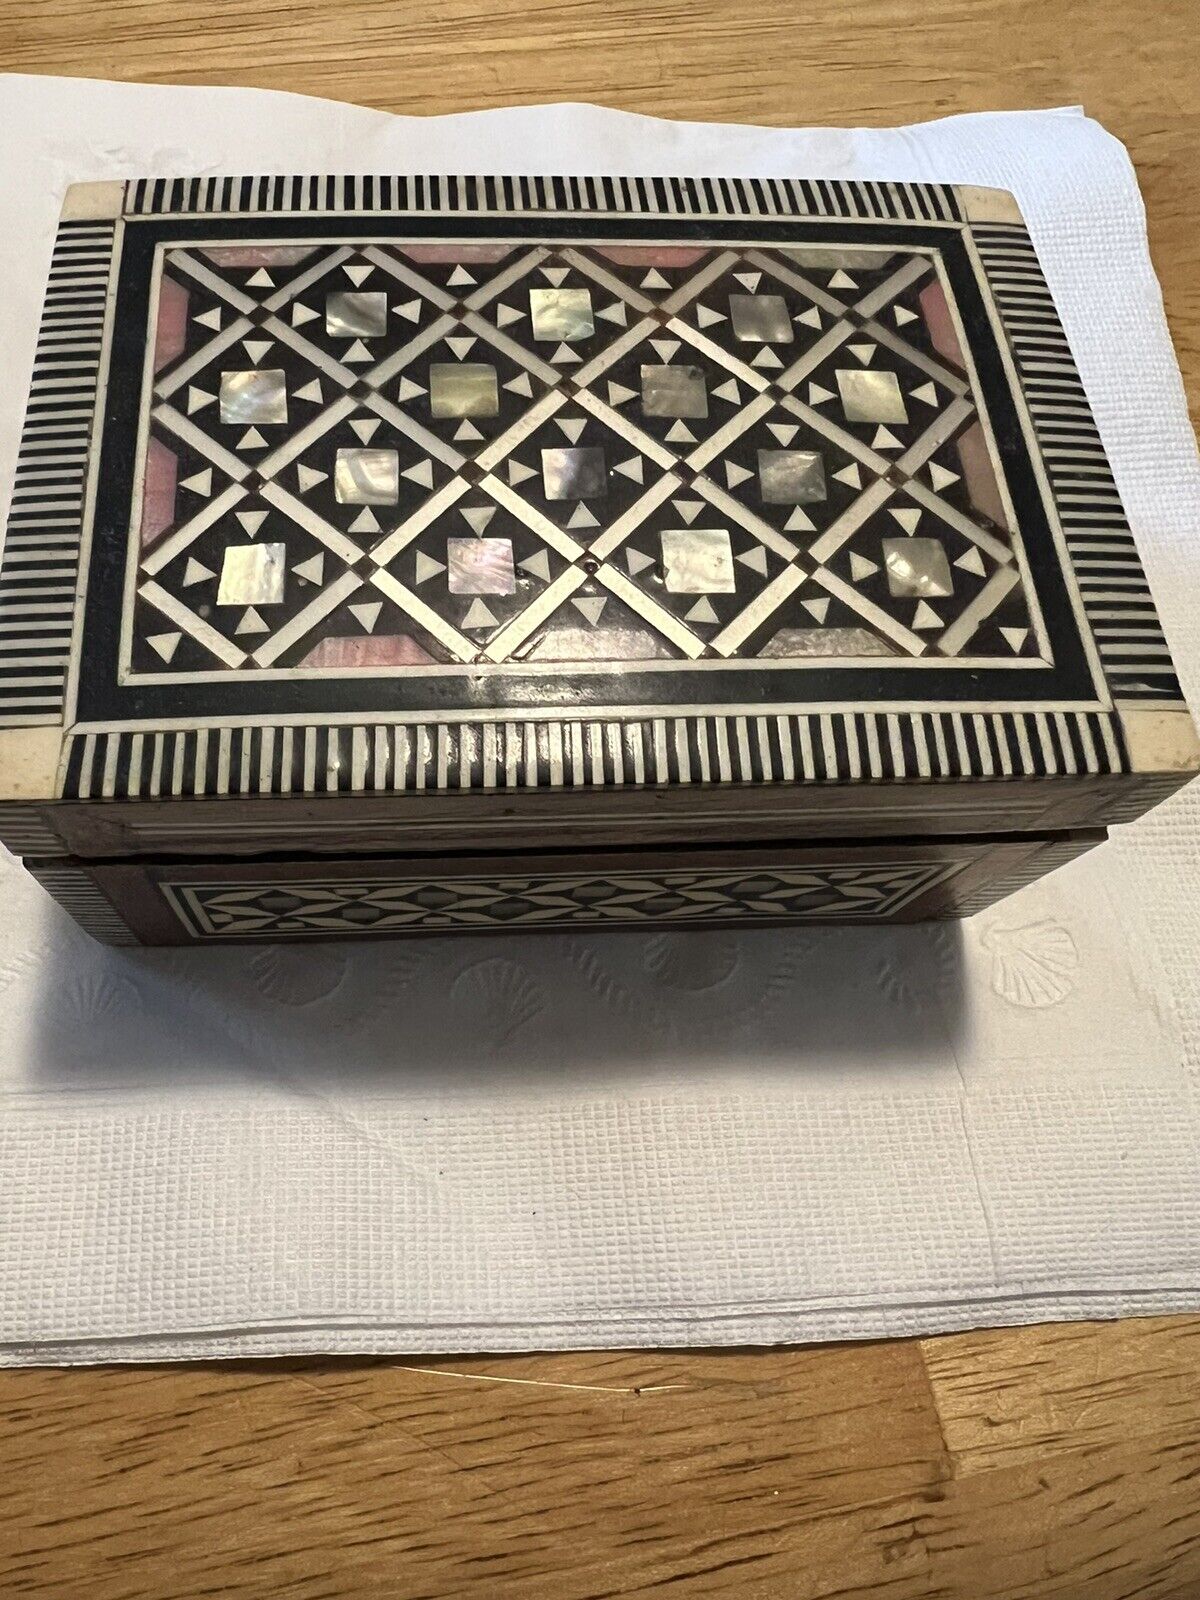 VTG MICRO MOSAIC MOTHER OF PEARL INLAY TRINKET BOX FROM EGYPT